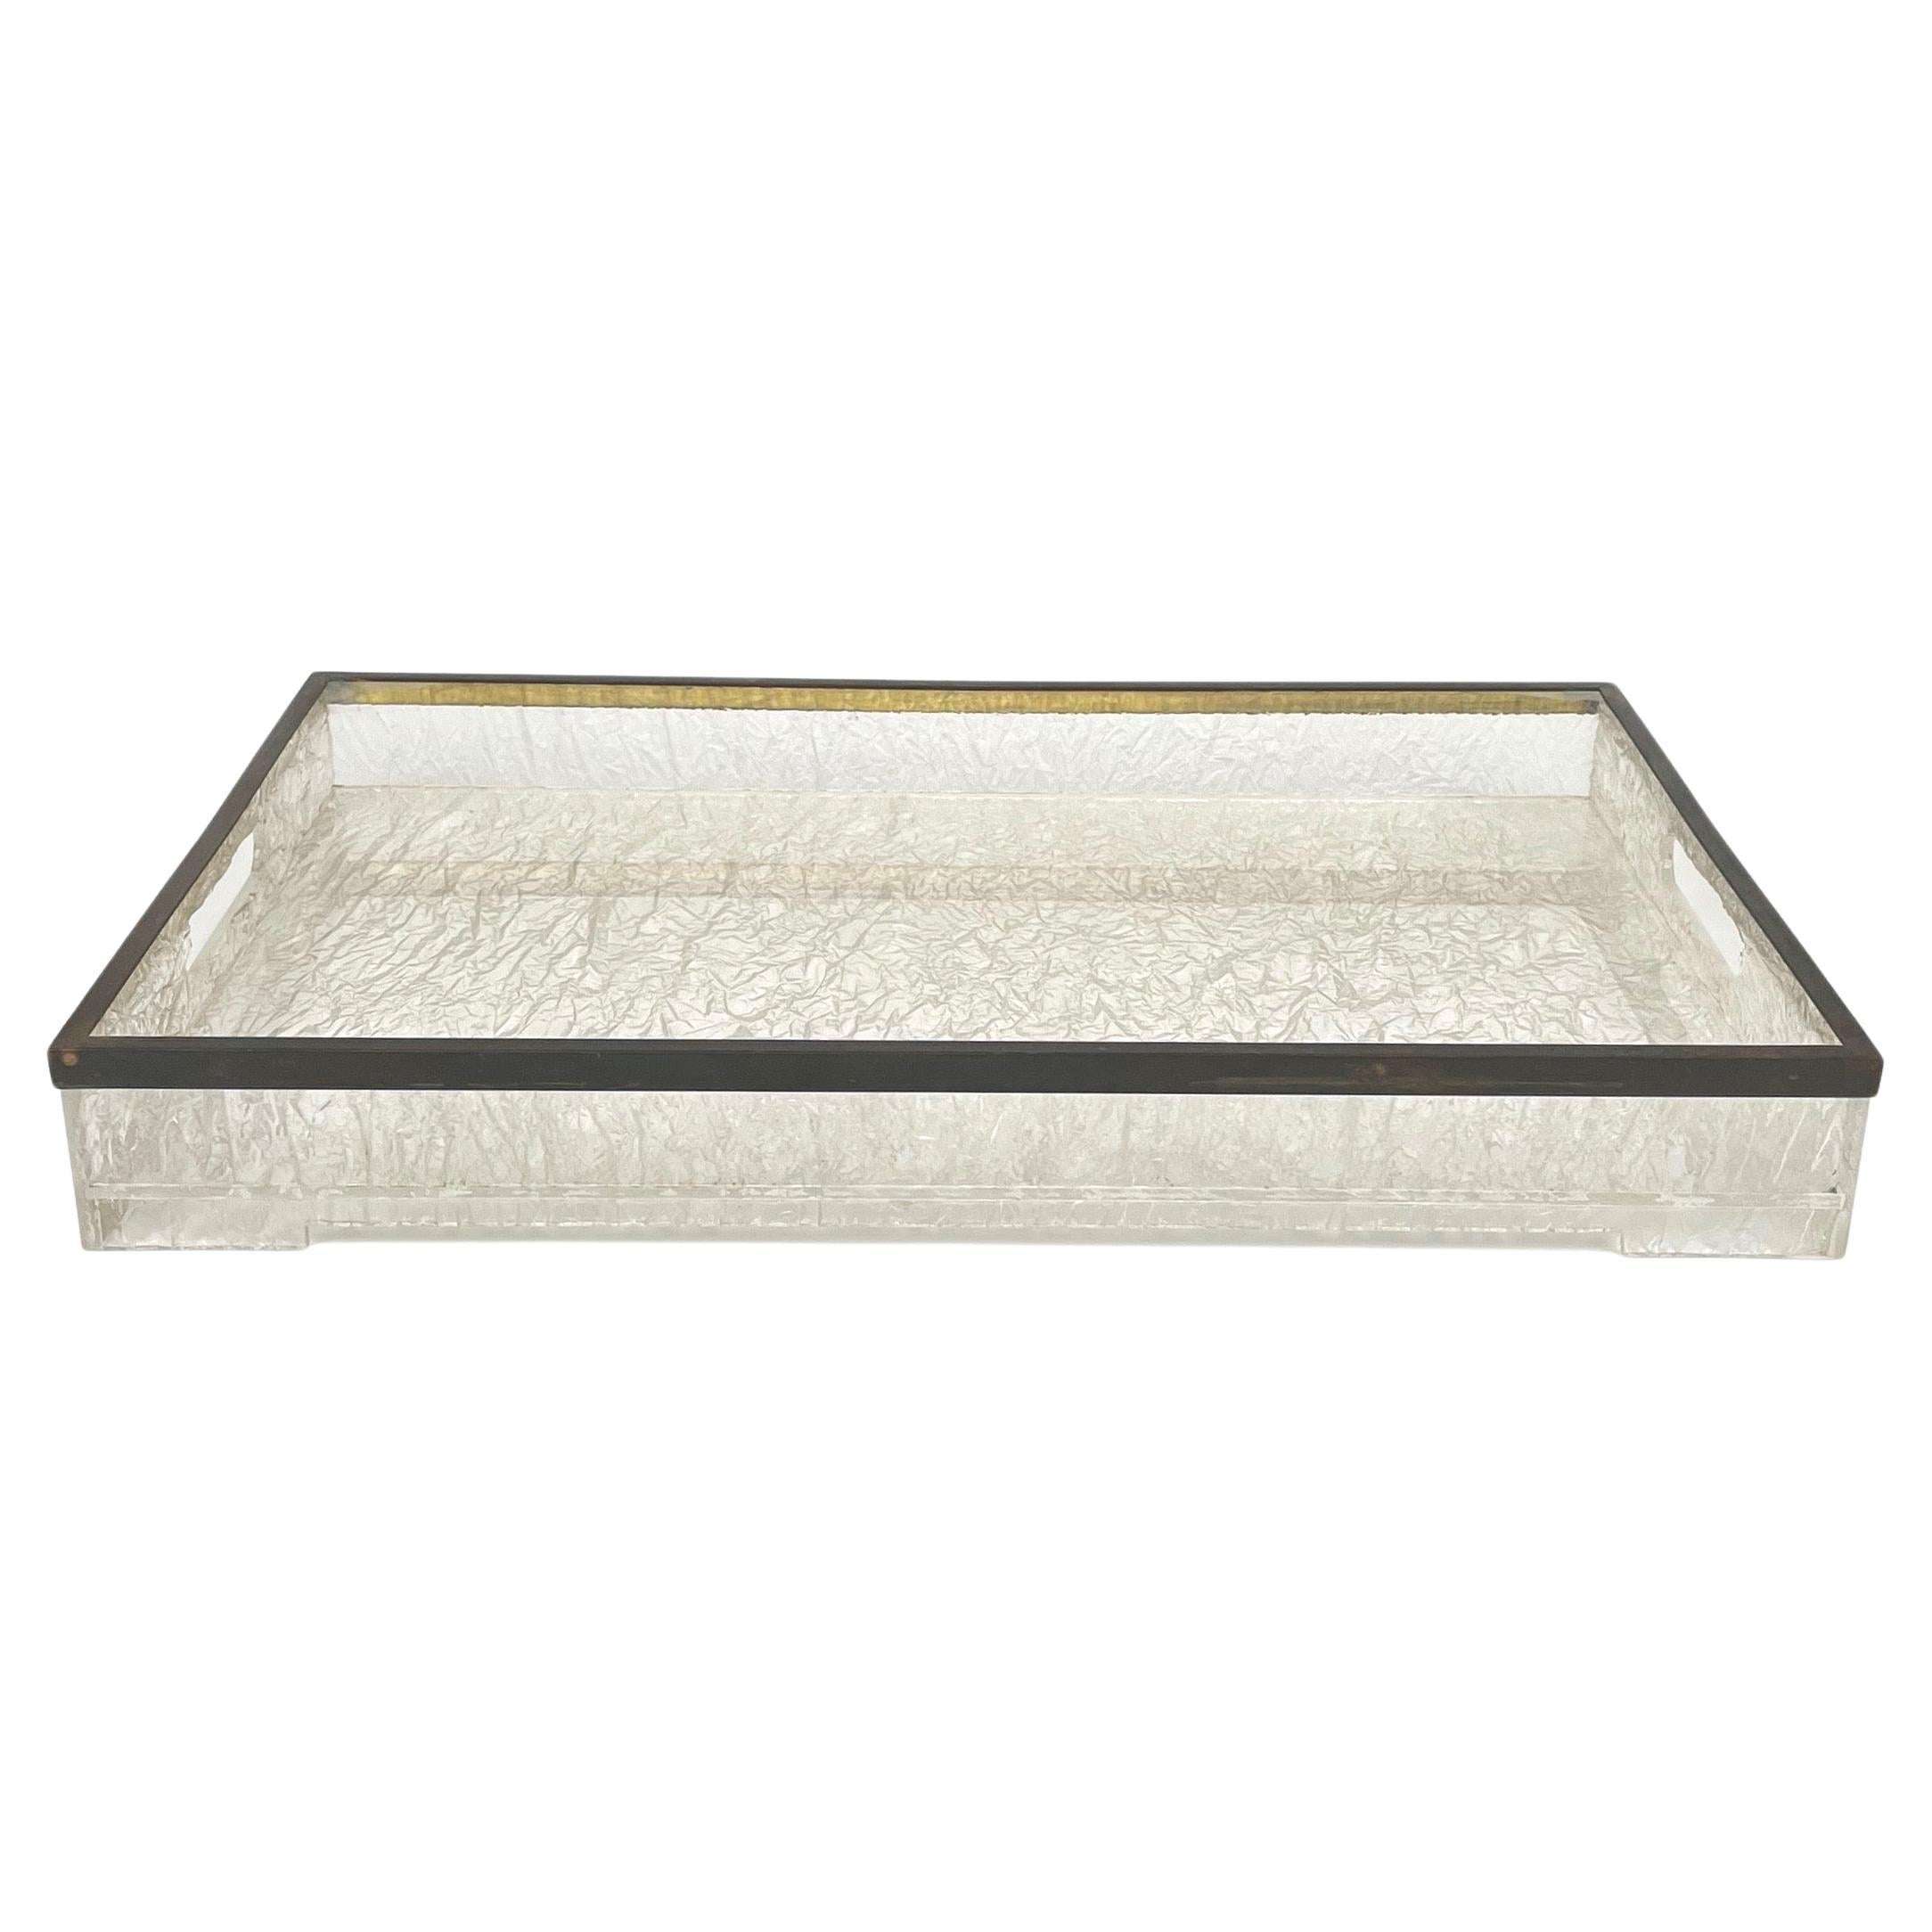 Centerpiece serving tray in ice effect Lucite and brass frame attributed to the Italian designer Willy Rizzo, circa 1970.

An elegant centrepiece that will complete a modern living room or a contemporary project.